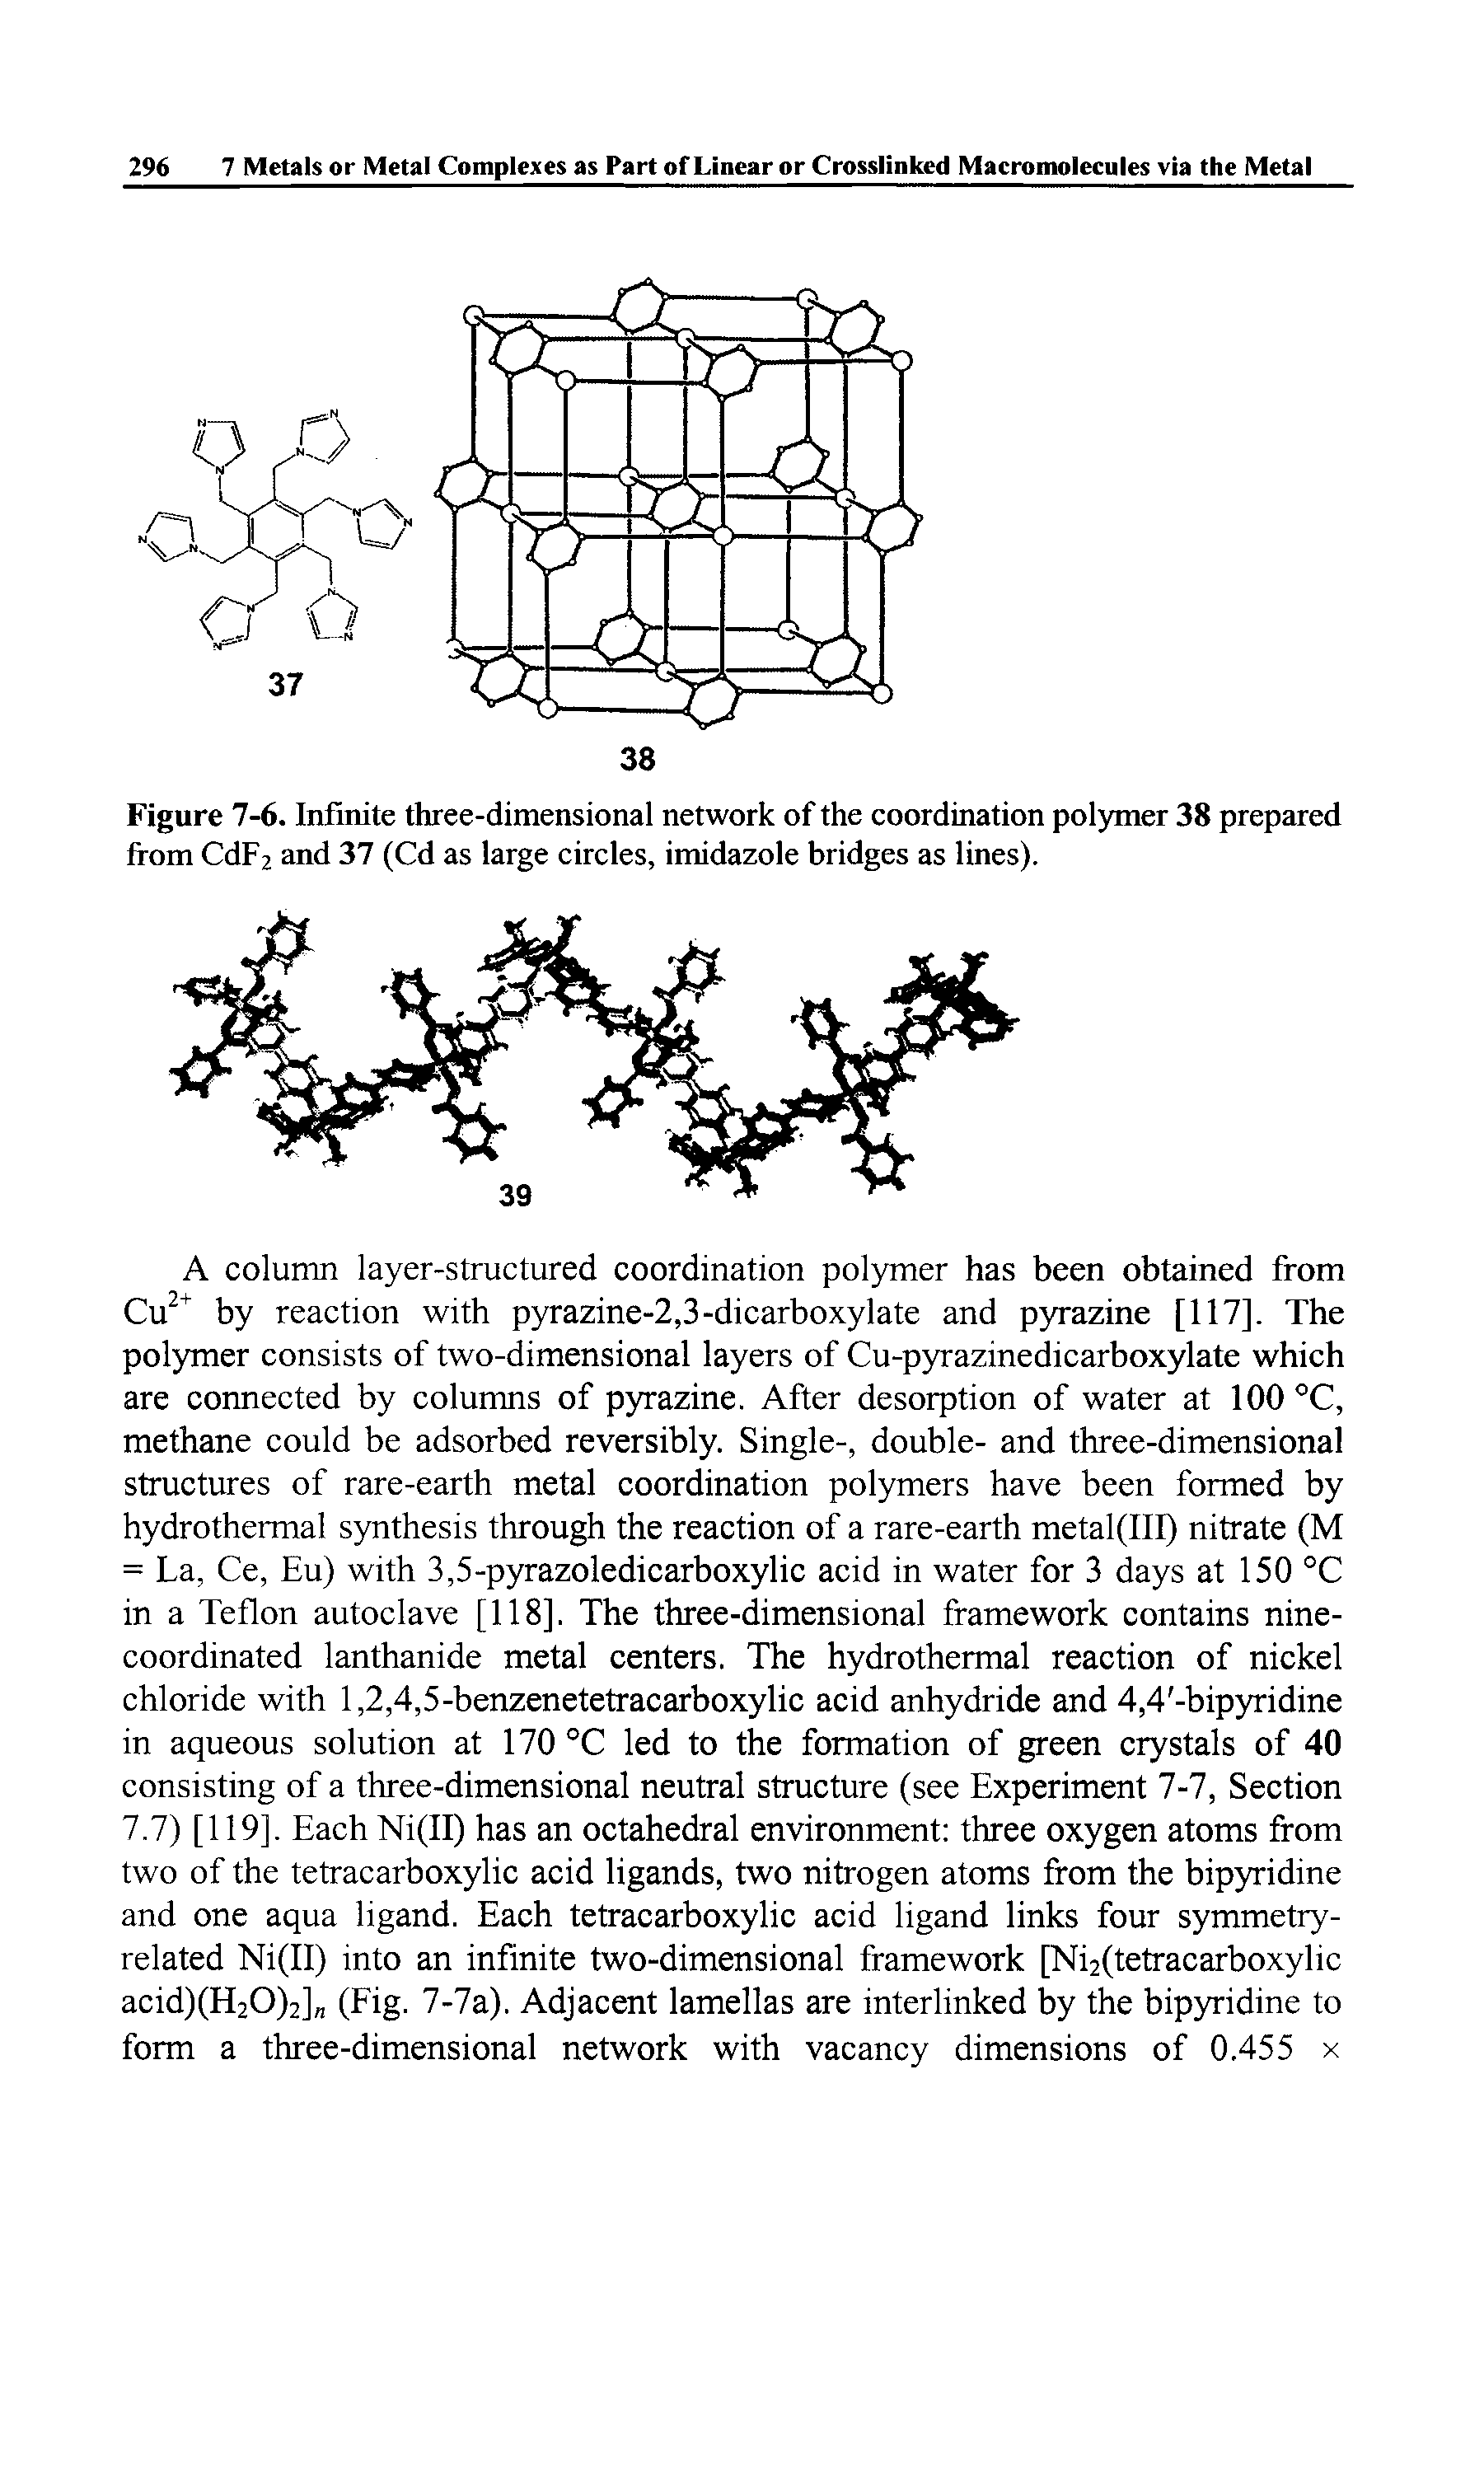 Figure 7-6. Infinite three-dimensional network of the coordination polymer 38 prepared from Cdp2 and 37 (Cd as large circles, imidazole bridges as lines).